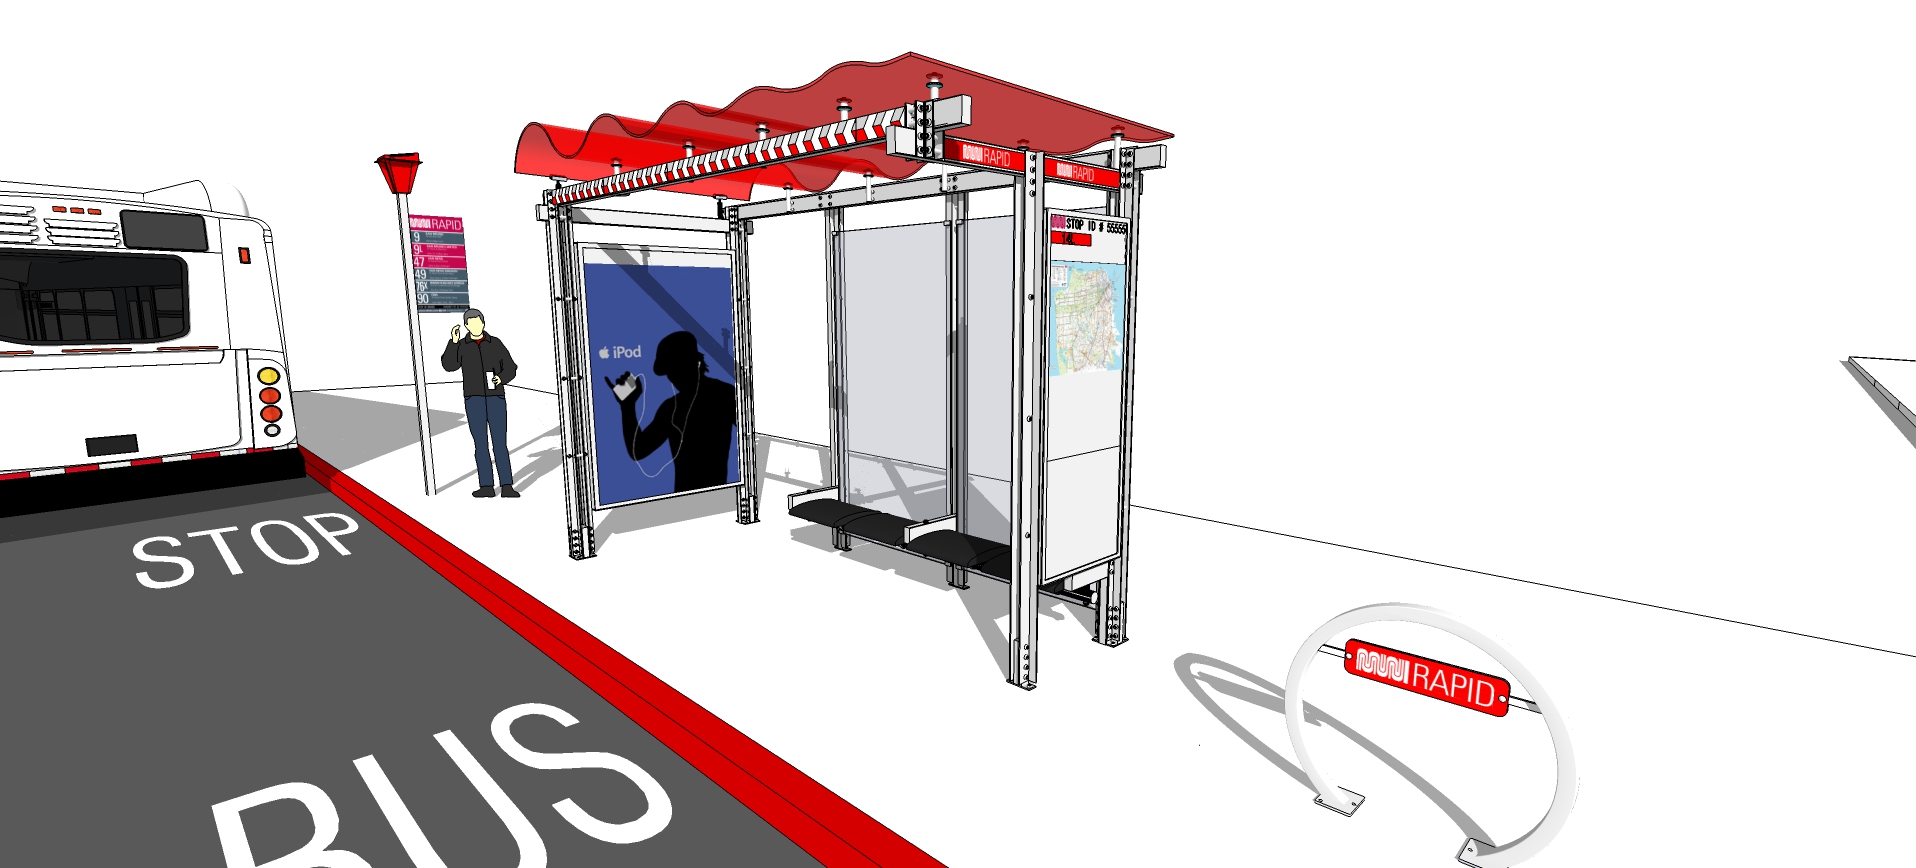 New Muni shelter signs show Rapid graphics in red and white on a rendering of a shelter on a street.